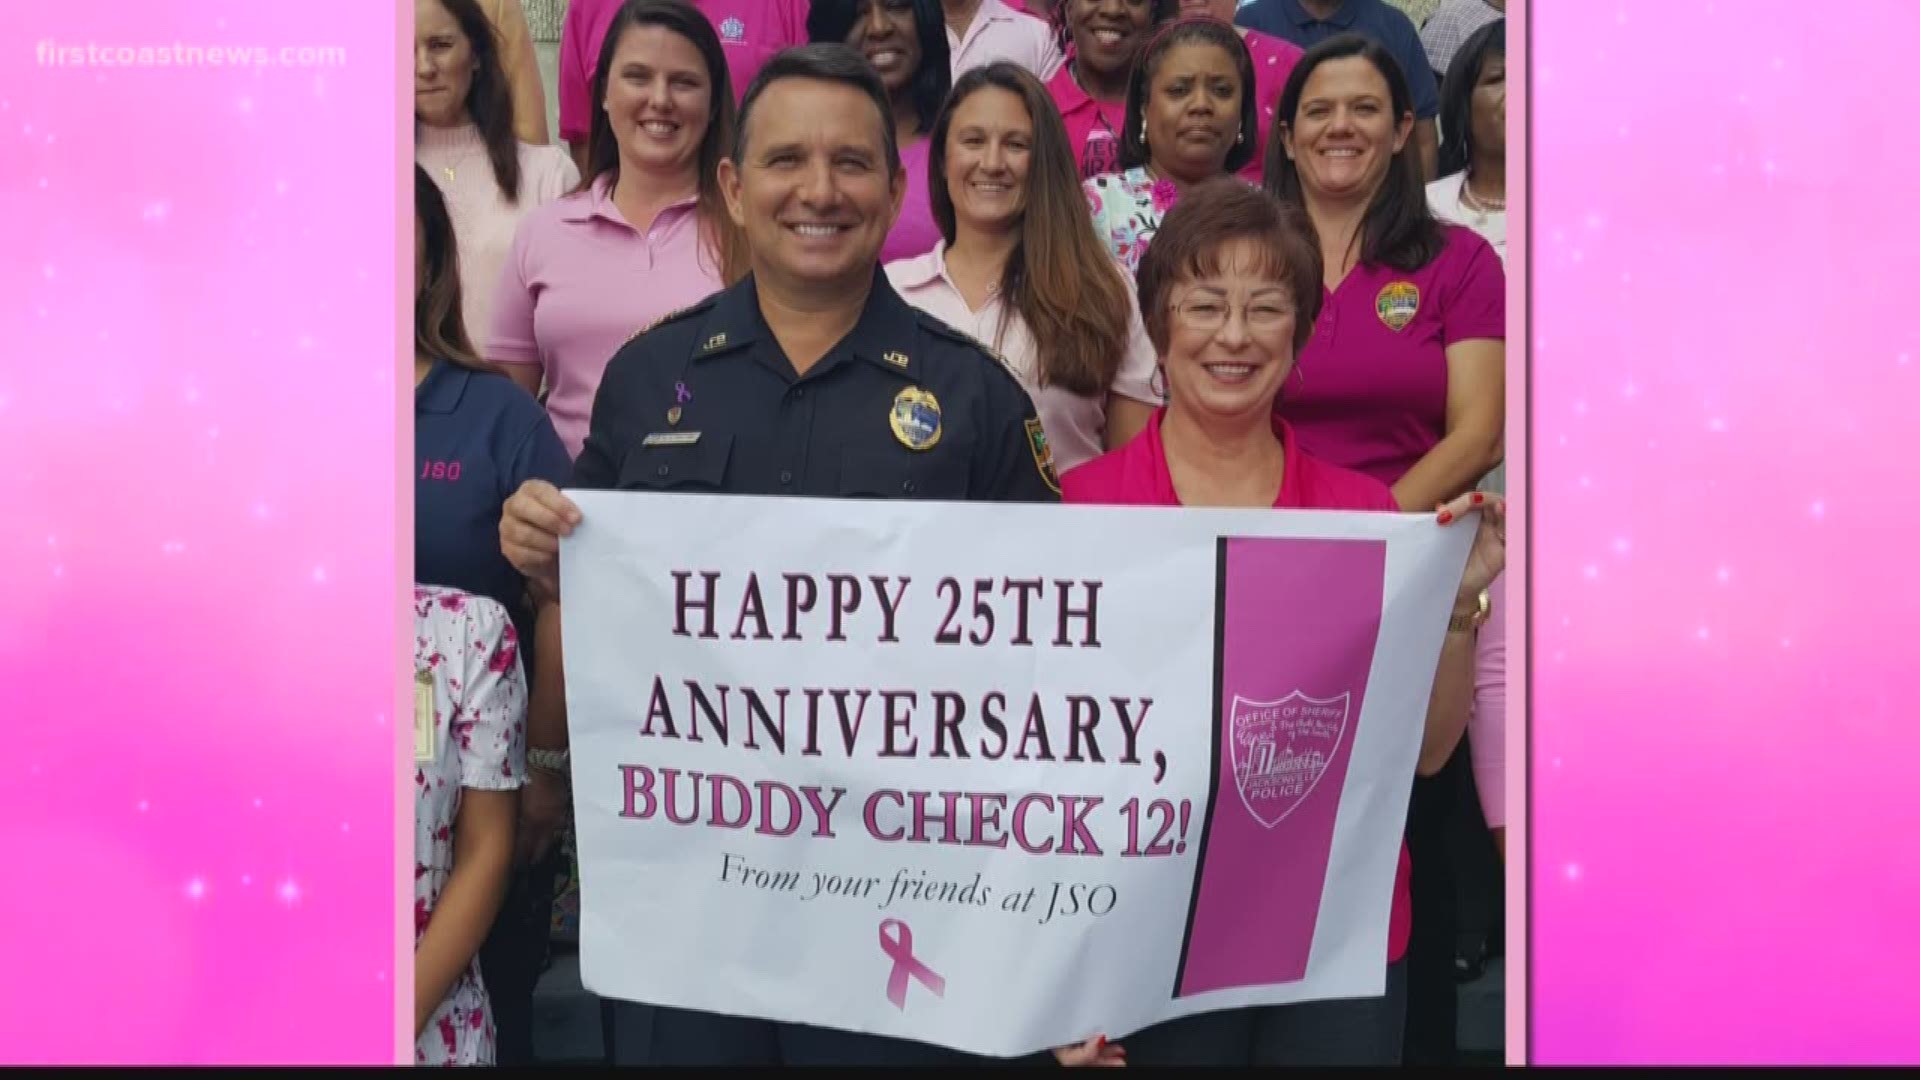 Jacksonville Sheriff's Office has been a supporter of Buddy Check for years.